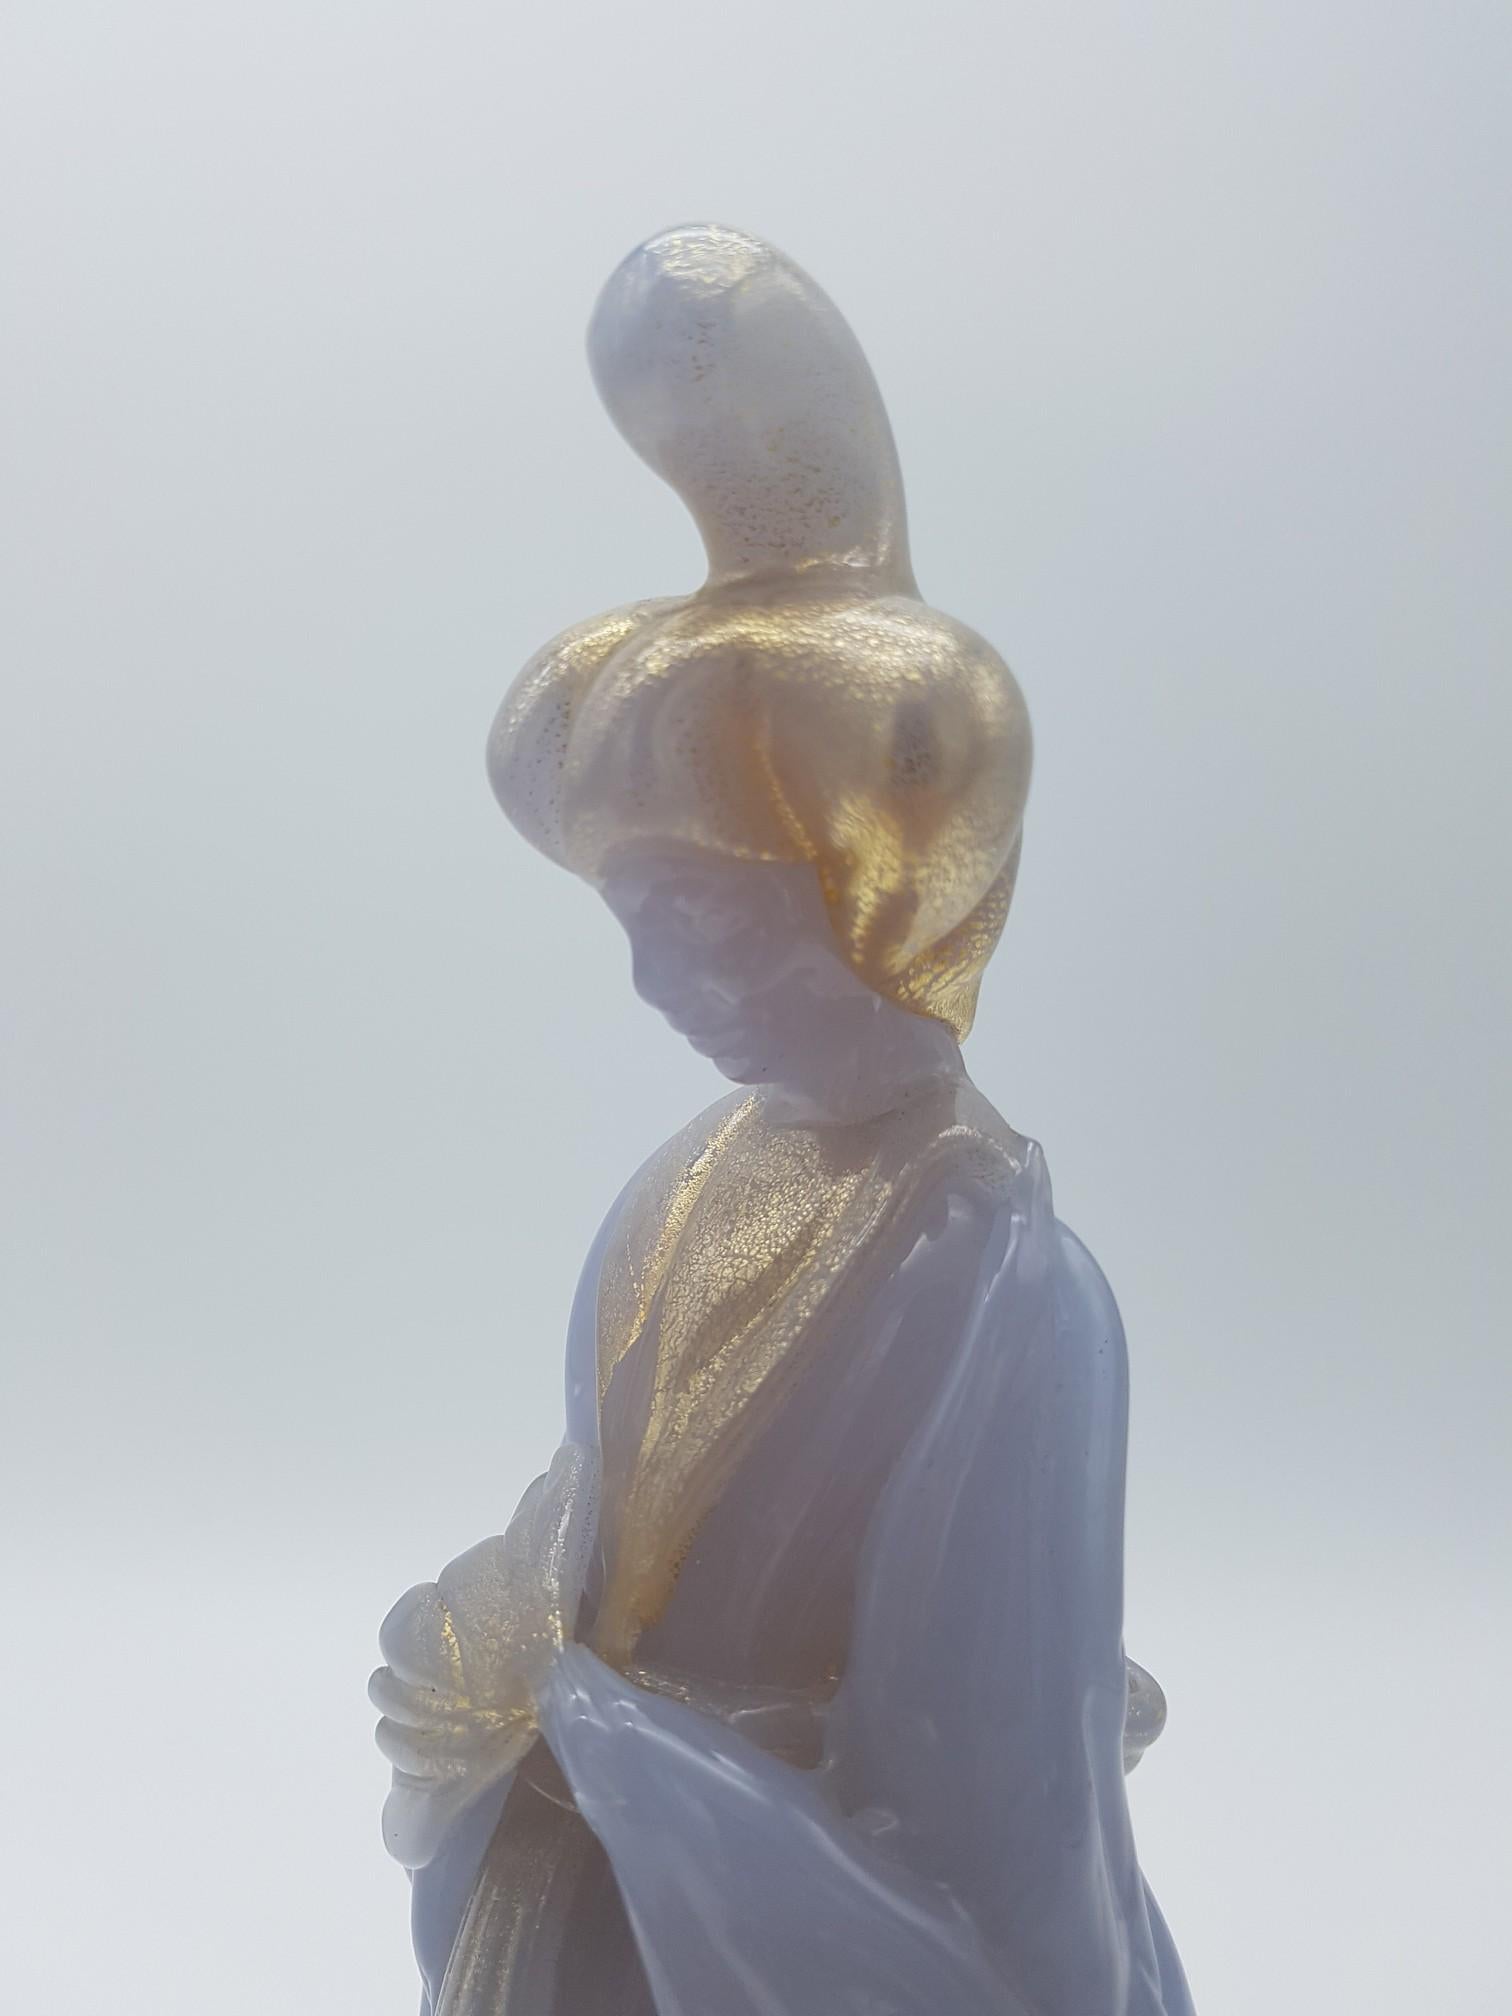 This vintage Murano glass figurine was handmade by the great glass-master Ermanno Nason at Gino Cenedese e Figlio glass factory in the late 1960s. The sculpture, all opaline lavender color, portrays a Japanese geisha and is a superb example of the